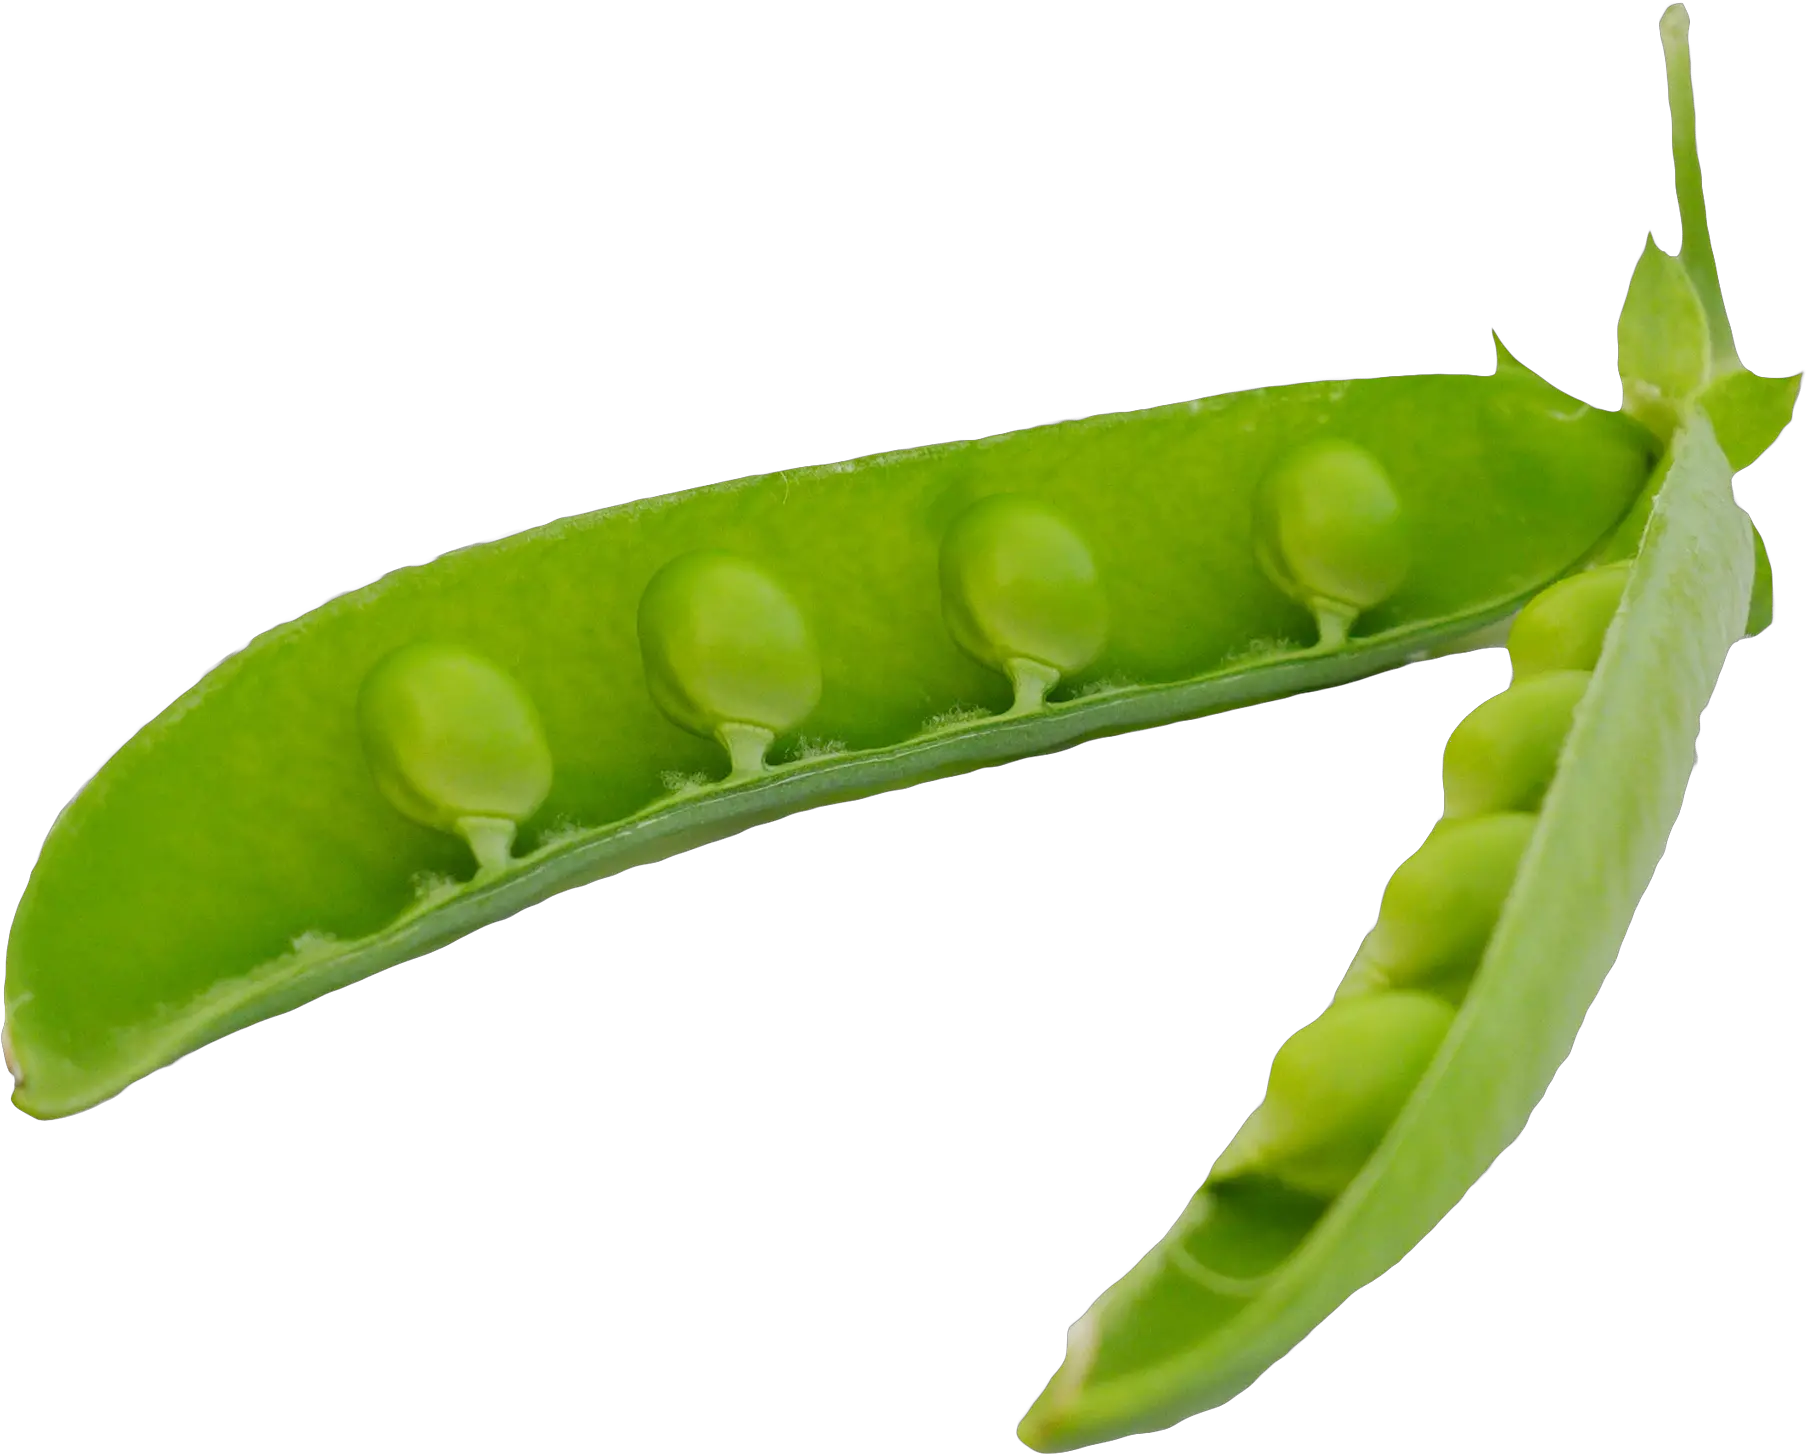 Download Green Peas Pods Png Image For Free Transparent Background Pea Pod Png Peas Png